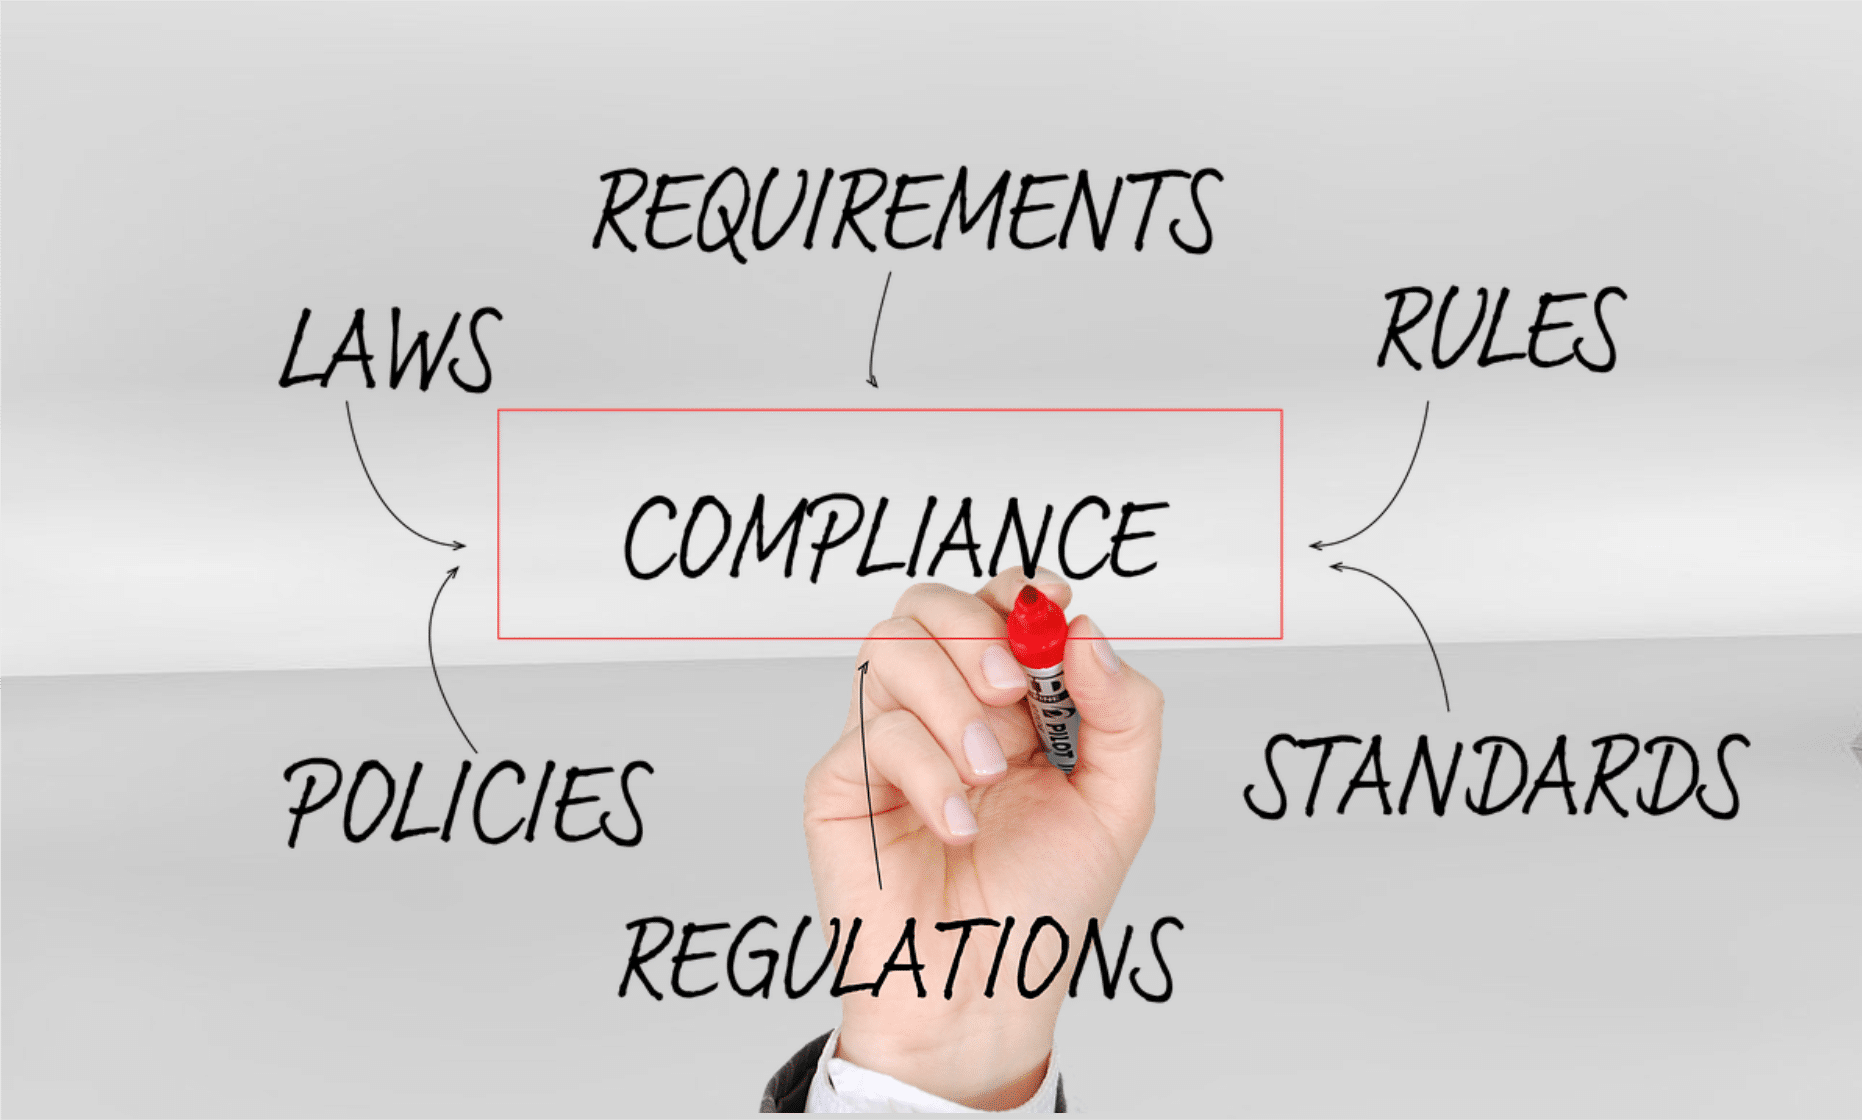 Are You Protecting Consumer Data? Non-Compliance Will Cost You